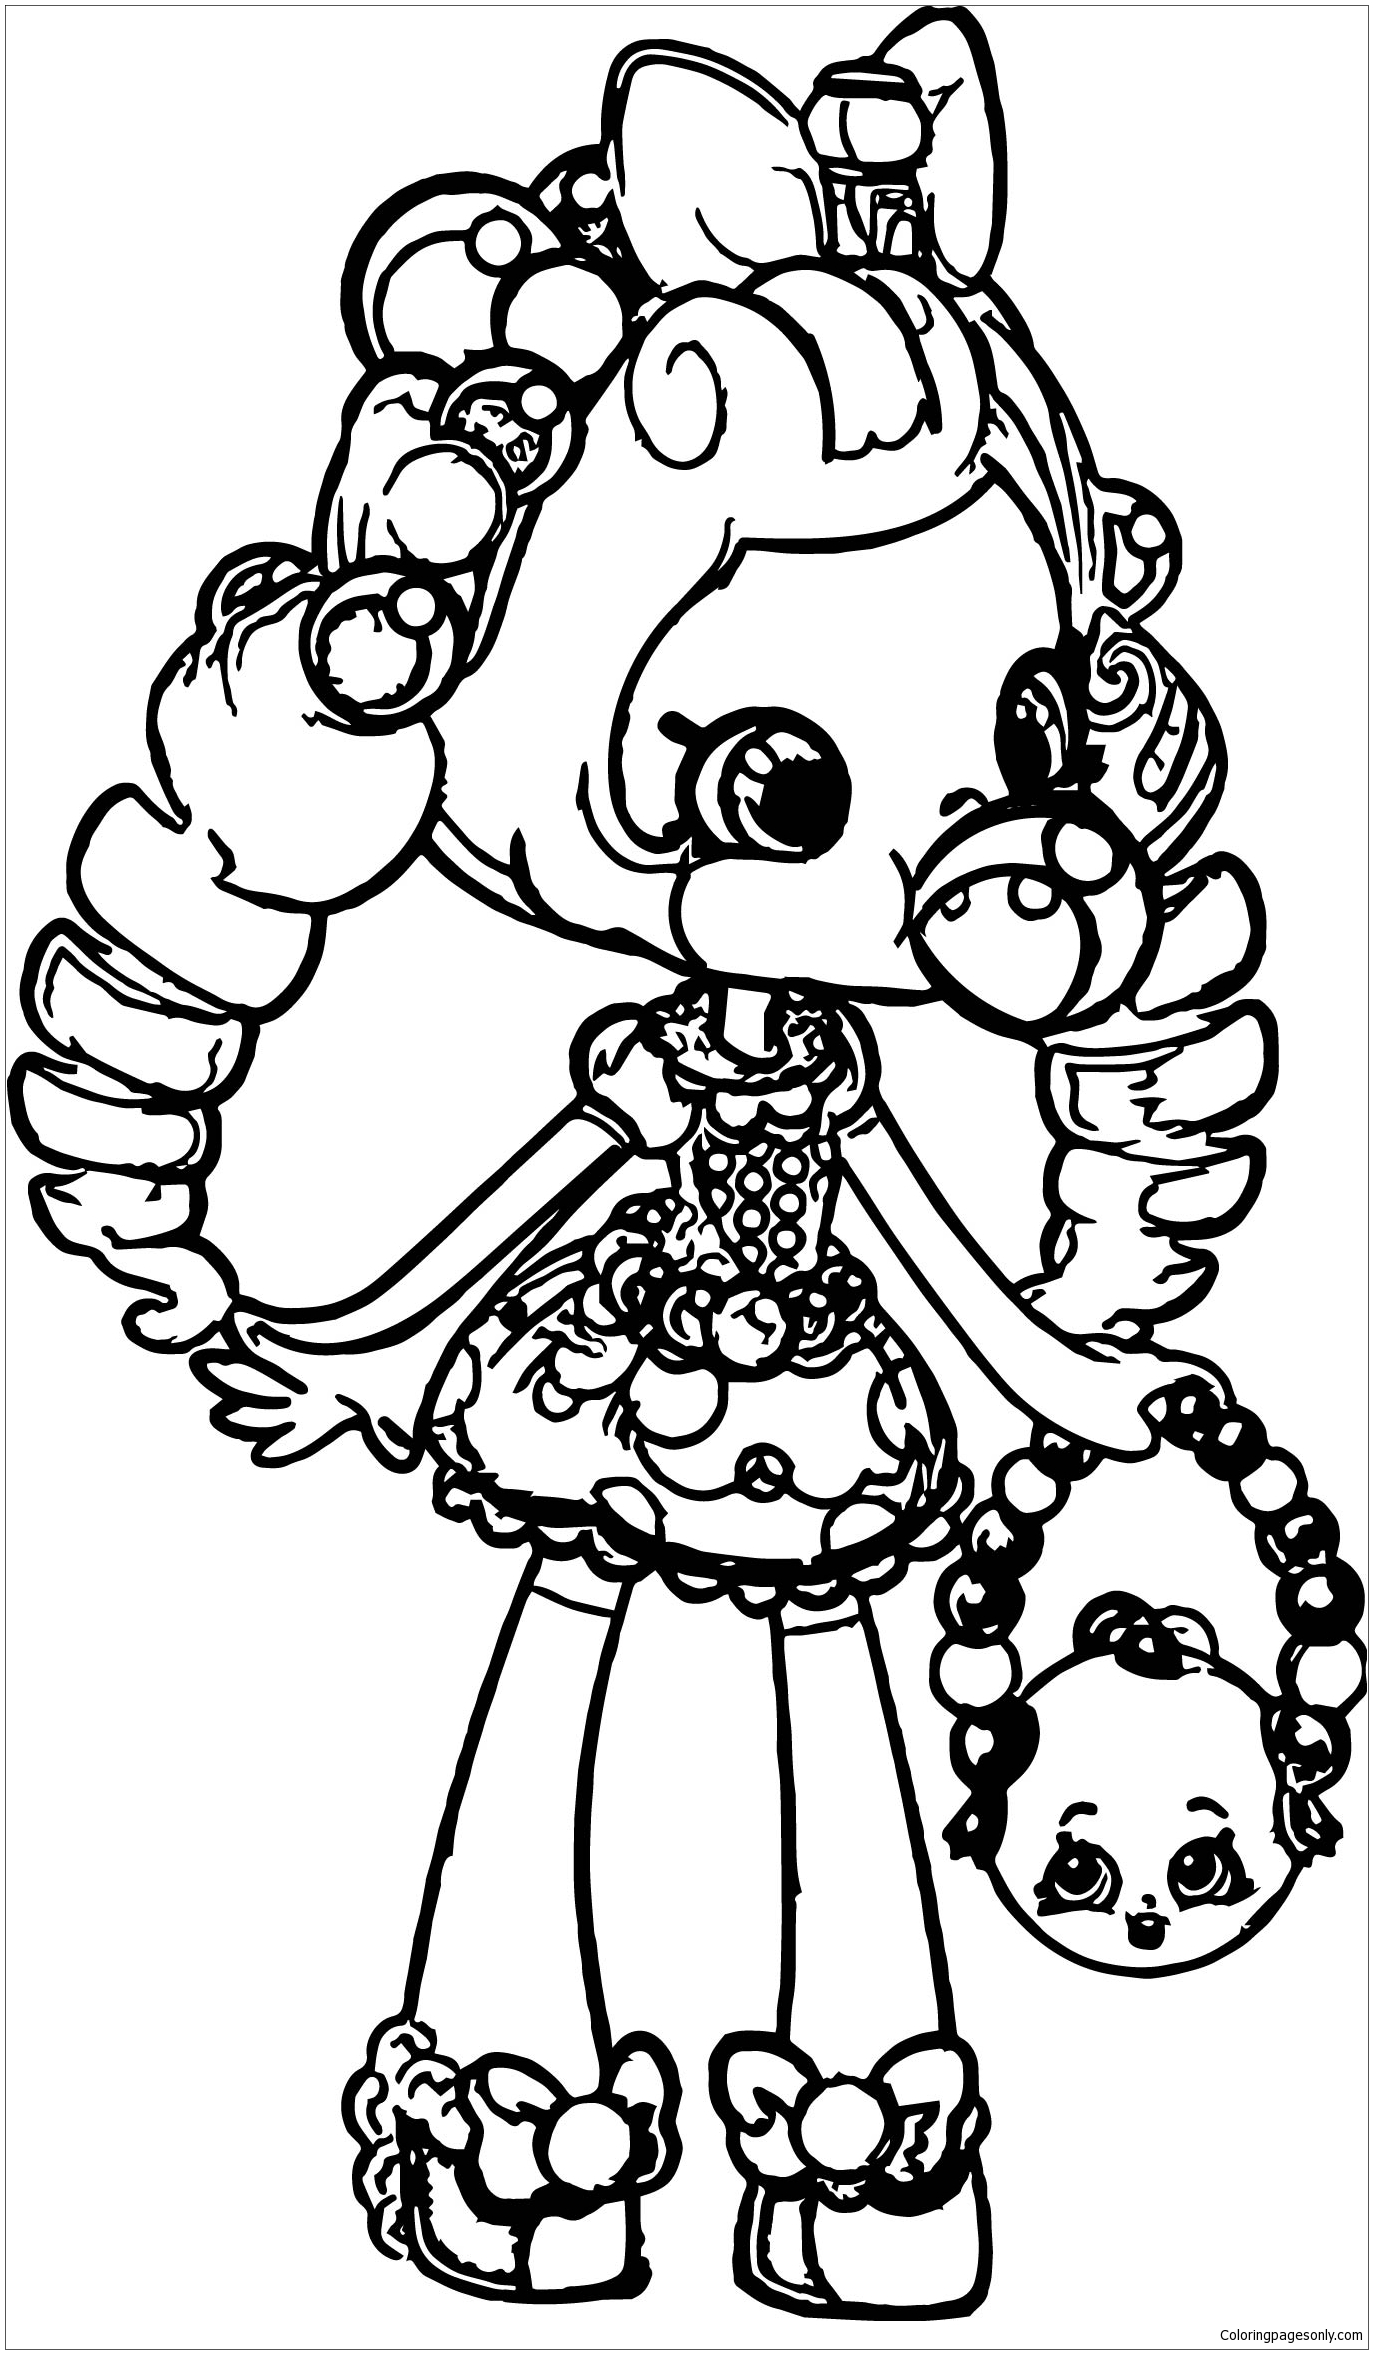 Shopkins Girl Coloring Page Free Coloring Pages Online